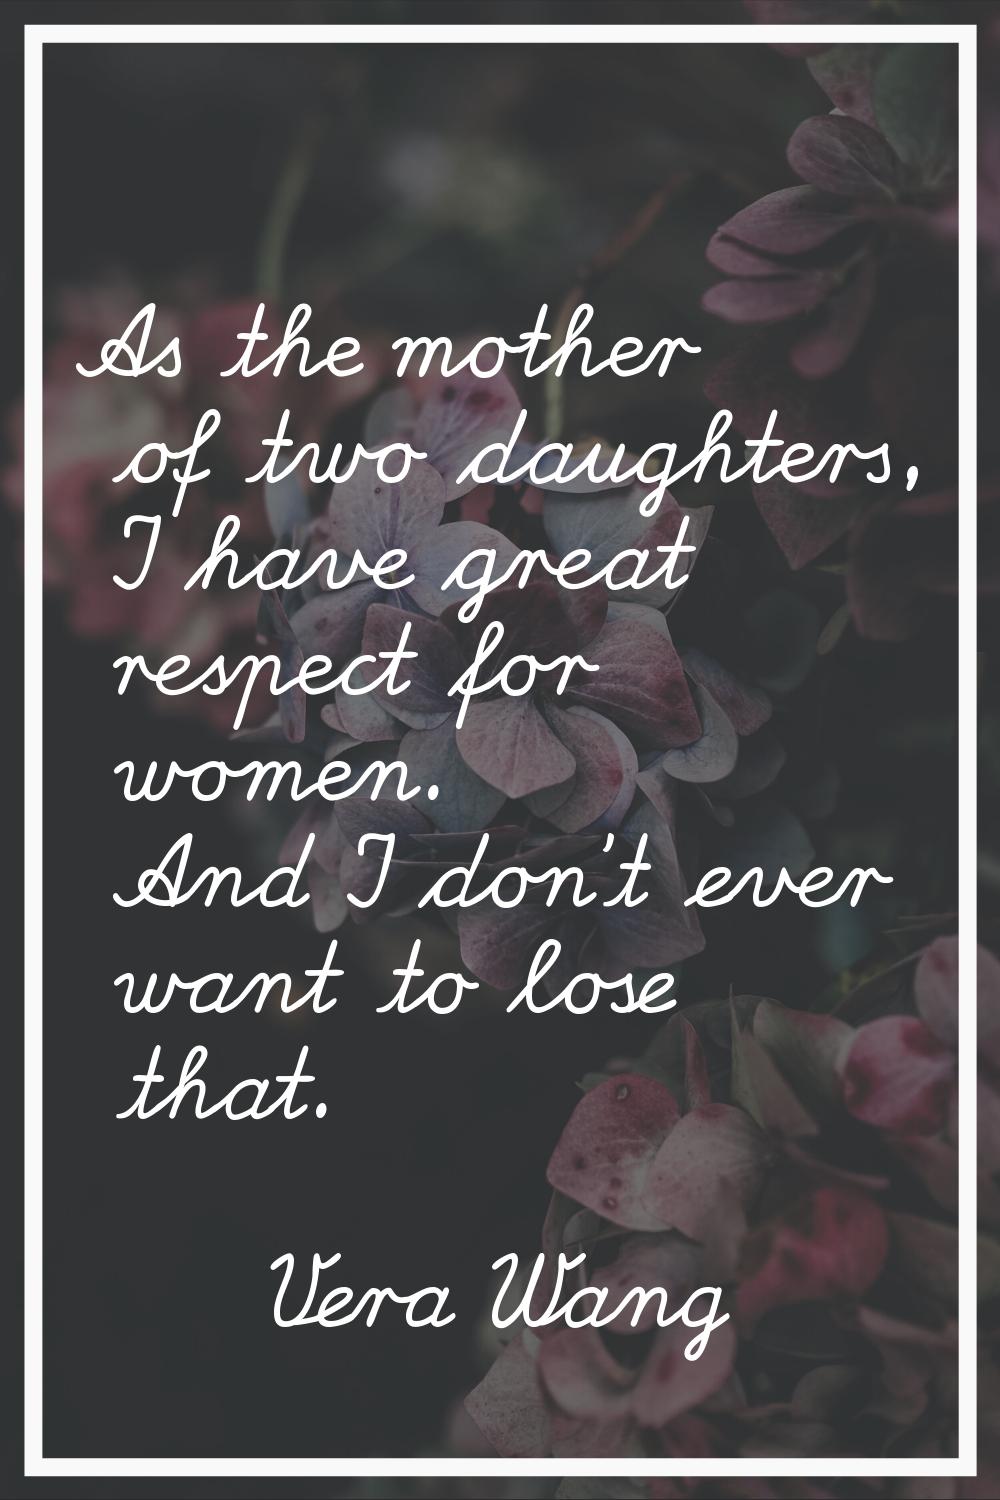 As the mother of two daughters, I have great respect for women. And I don't ever want to lose that.